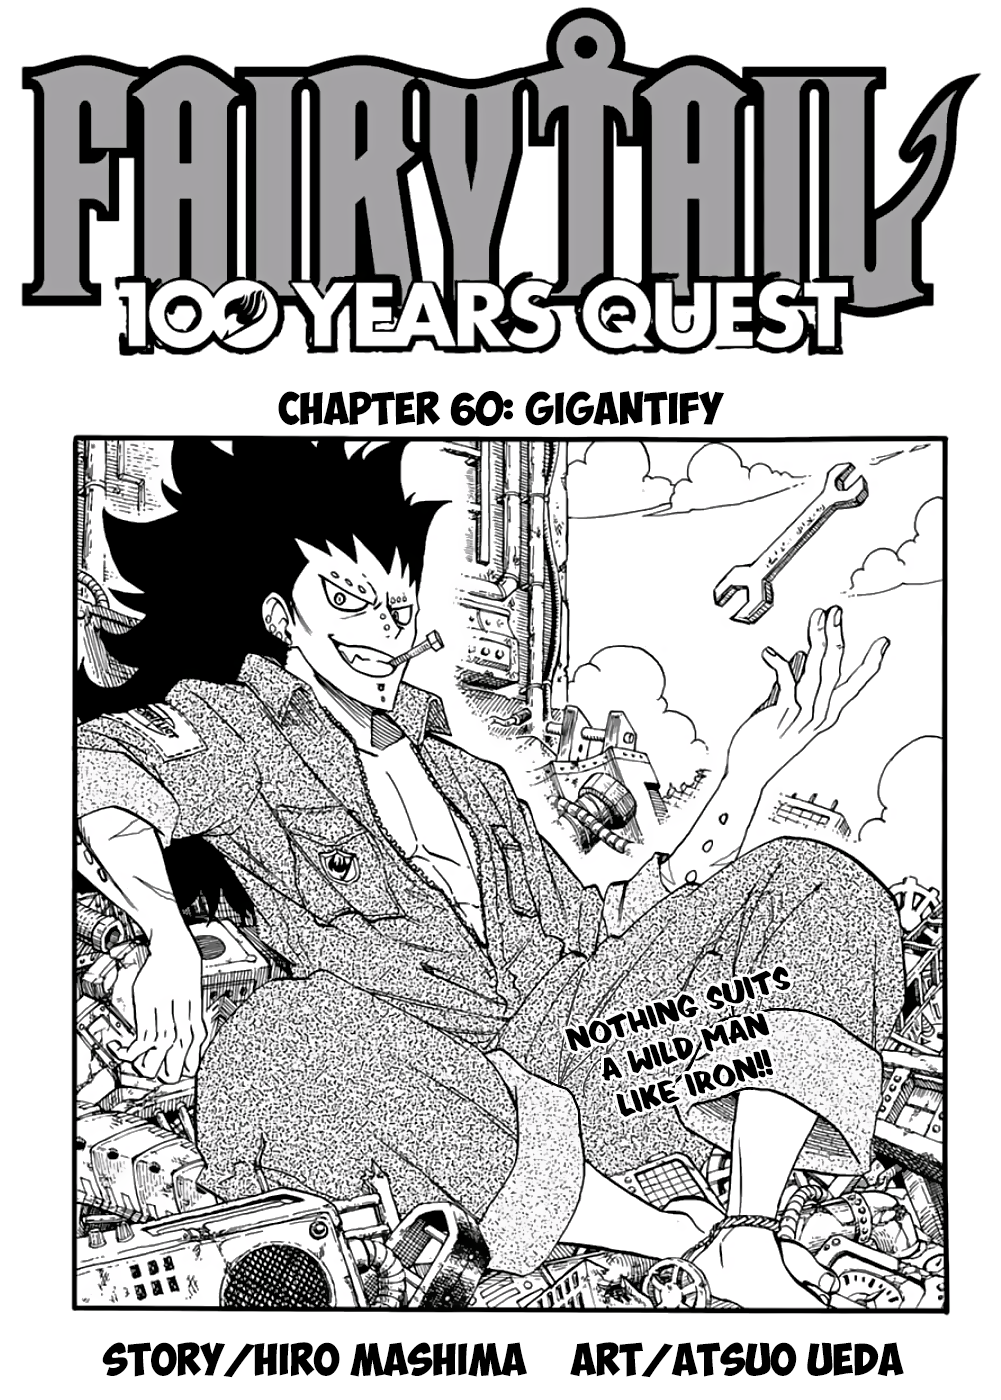 Years 100 quest tail fairy Fairy Tail: